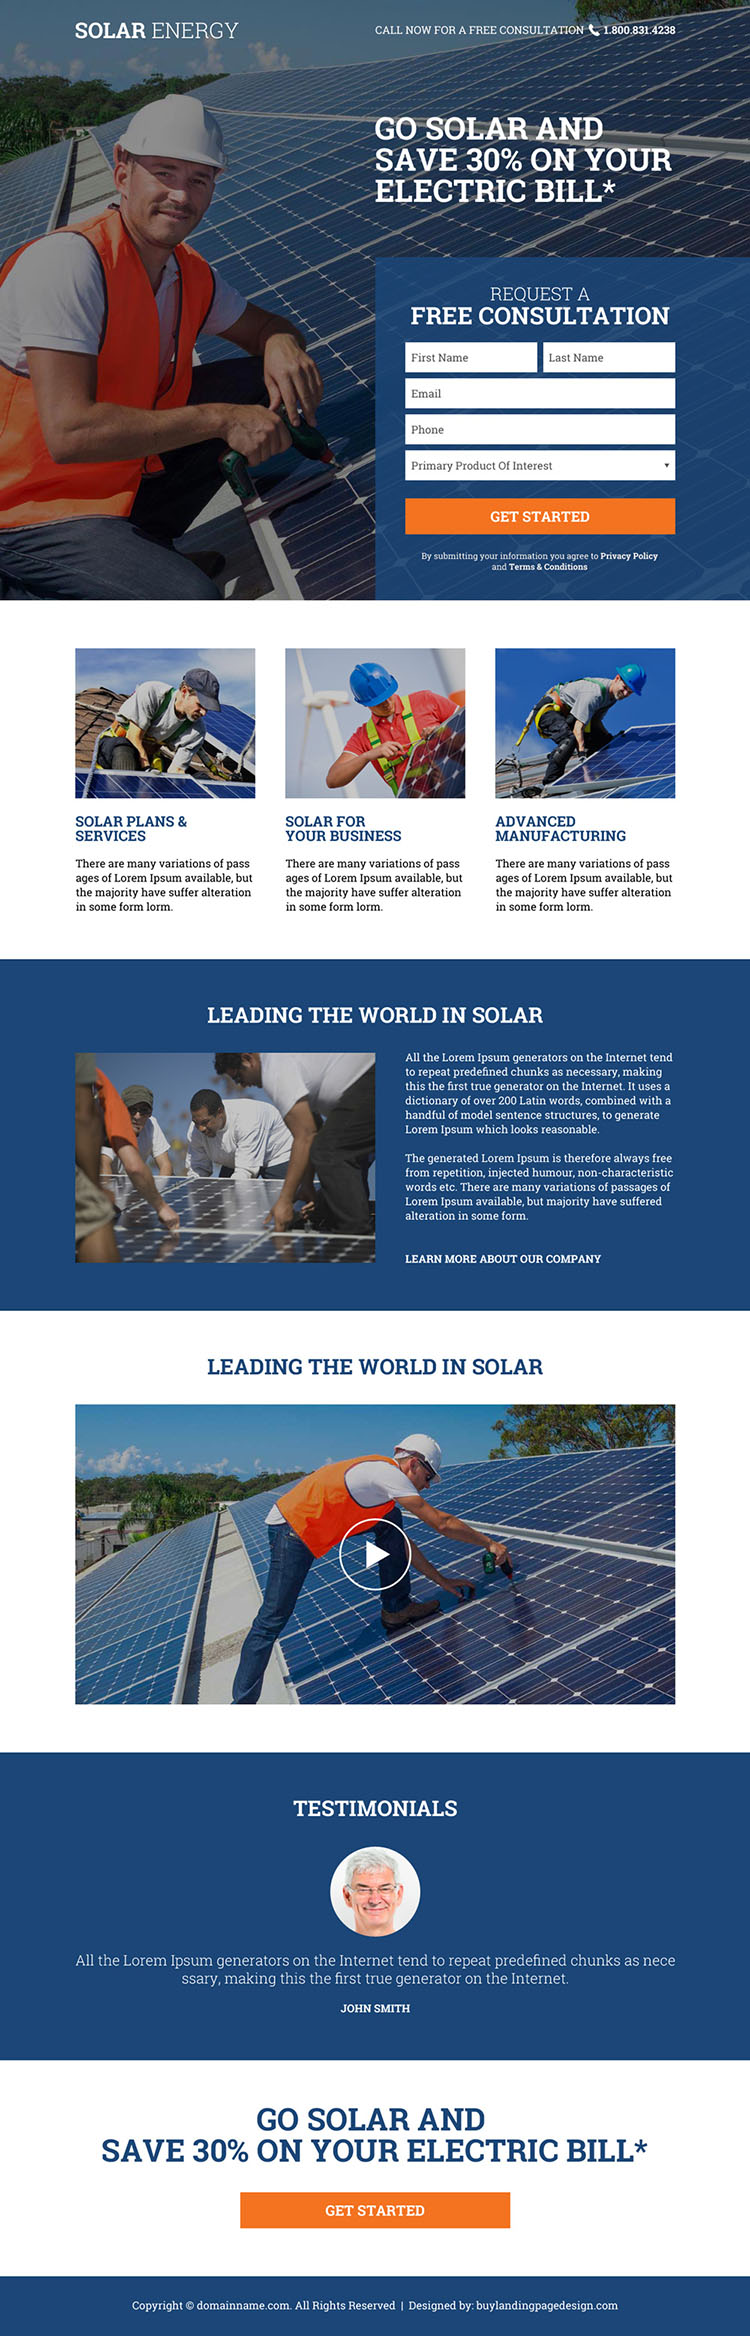 solar energy free consultation lead capturing responsive landing page